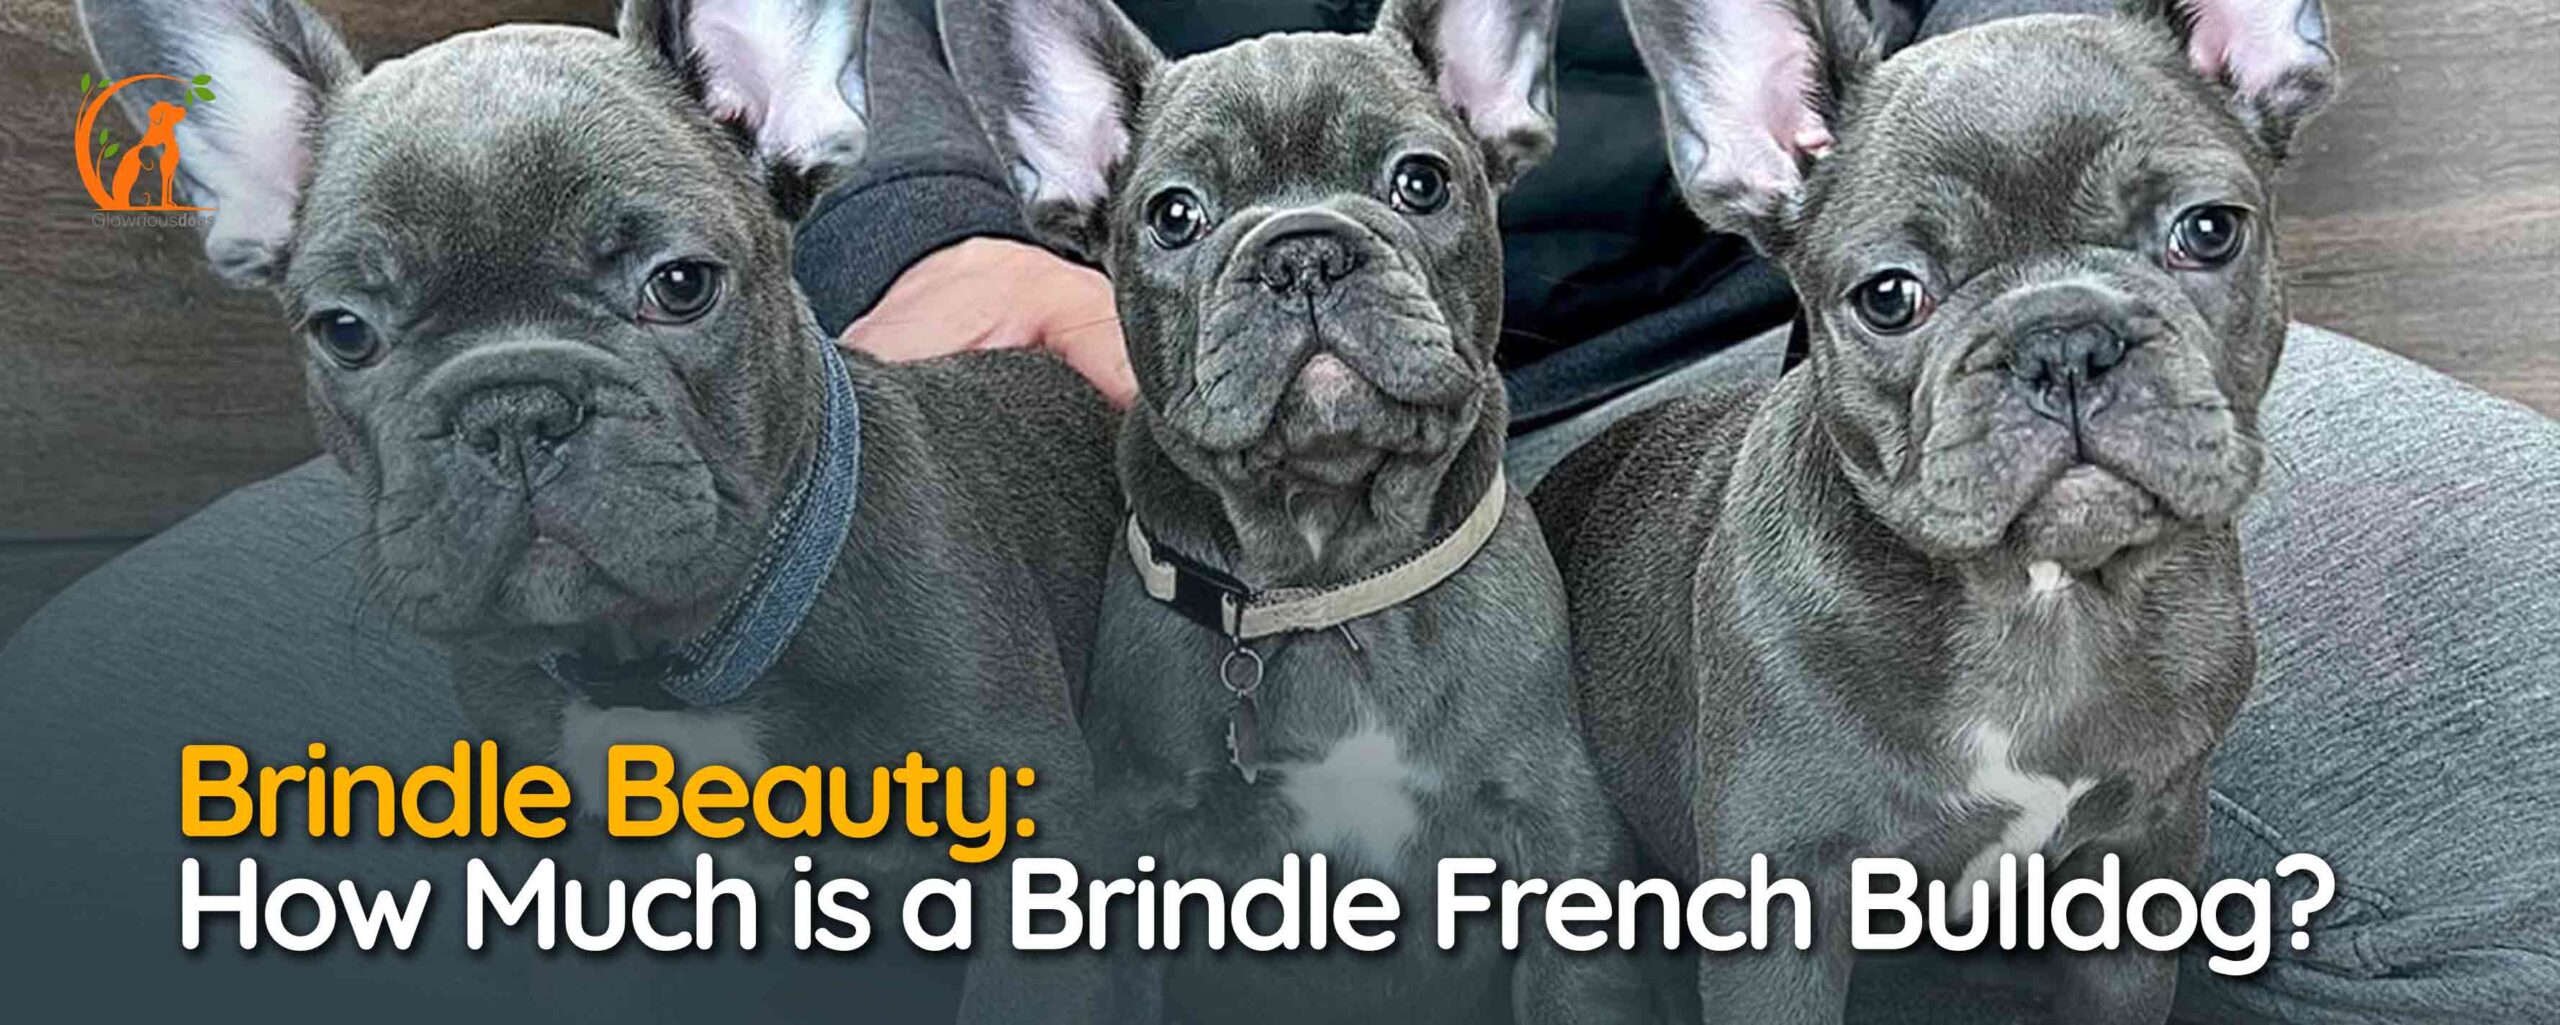 How Much is a Brindle French Bulldog